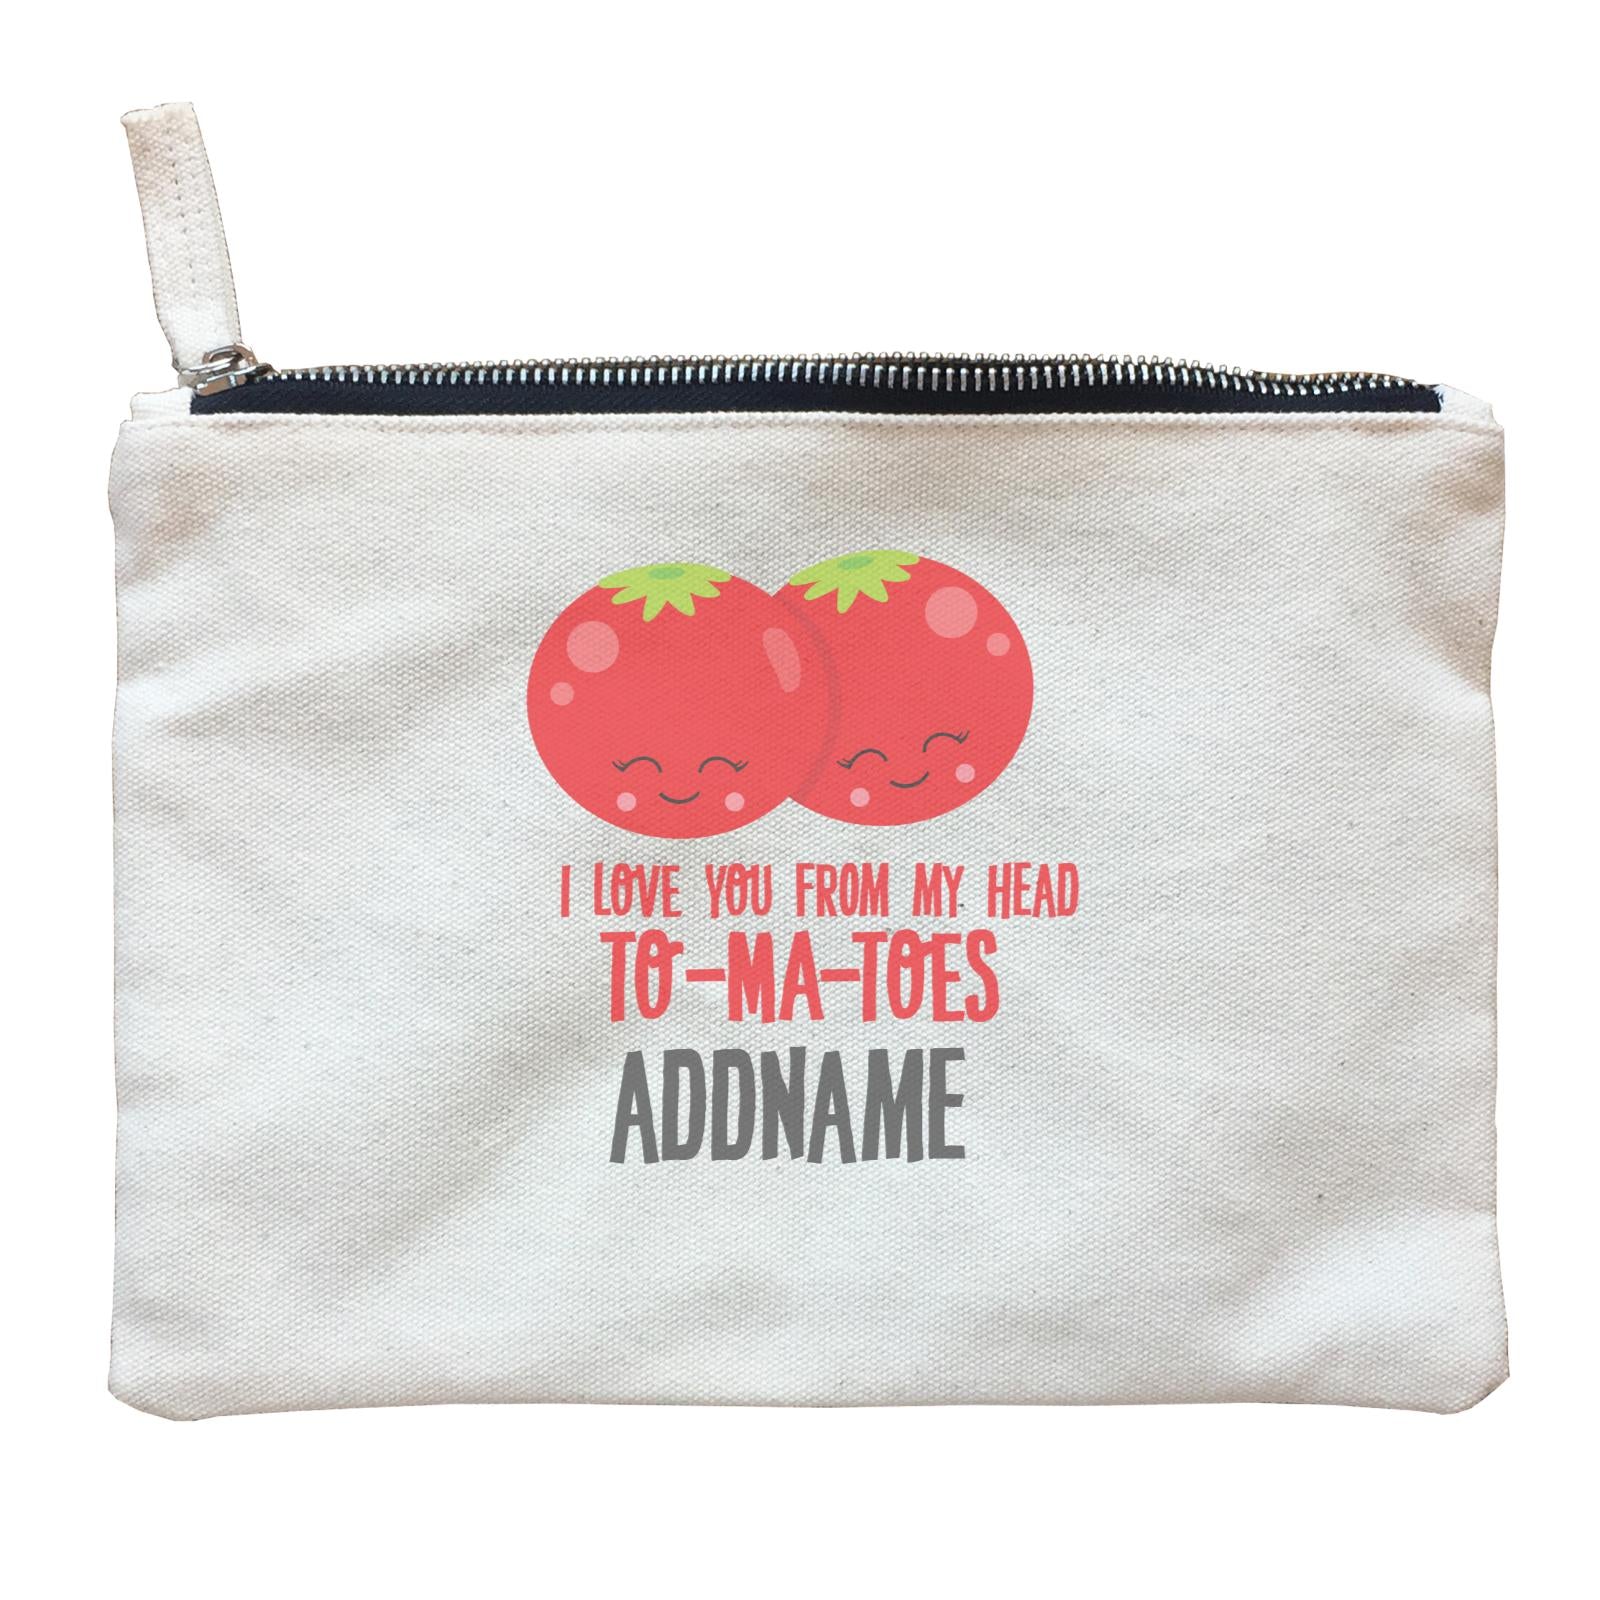 Love Food Puns I Love You From My Head TOMATOES Addname Zipper Pouch